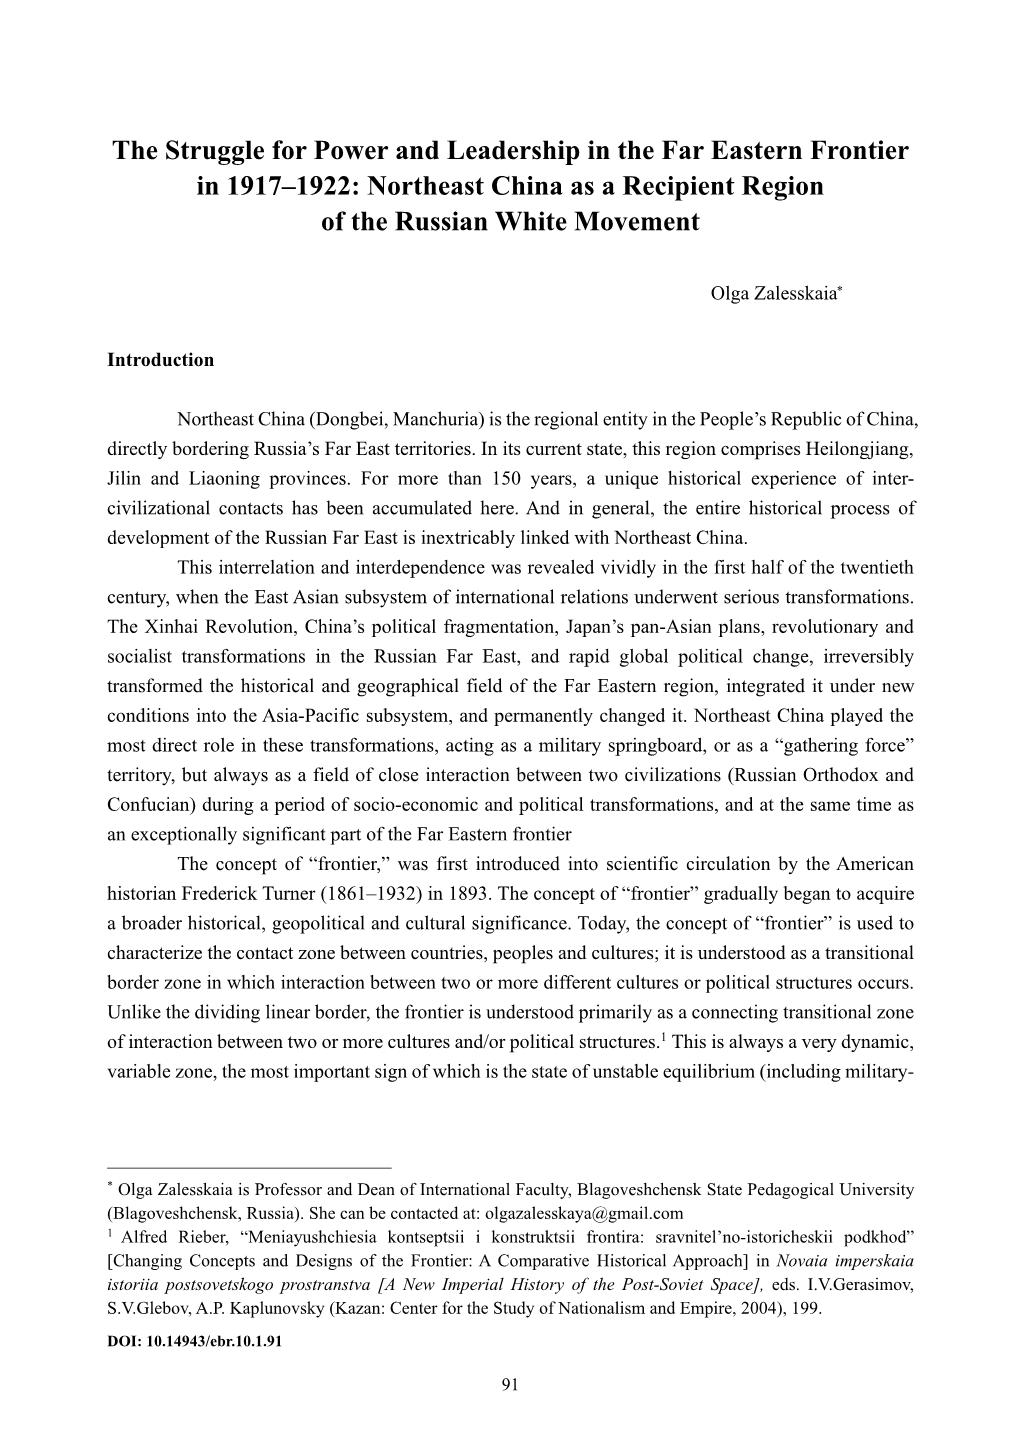 Northeast China As a Recipient Region of the Russian White Movement